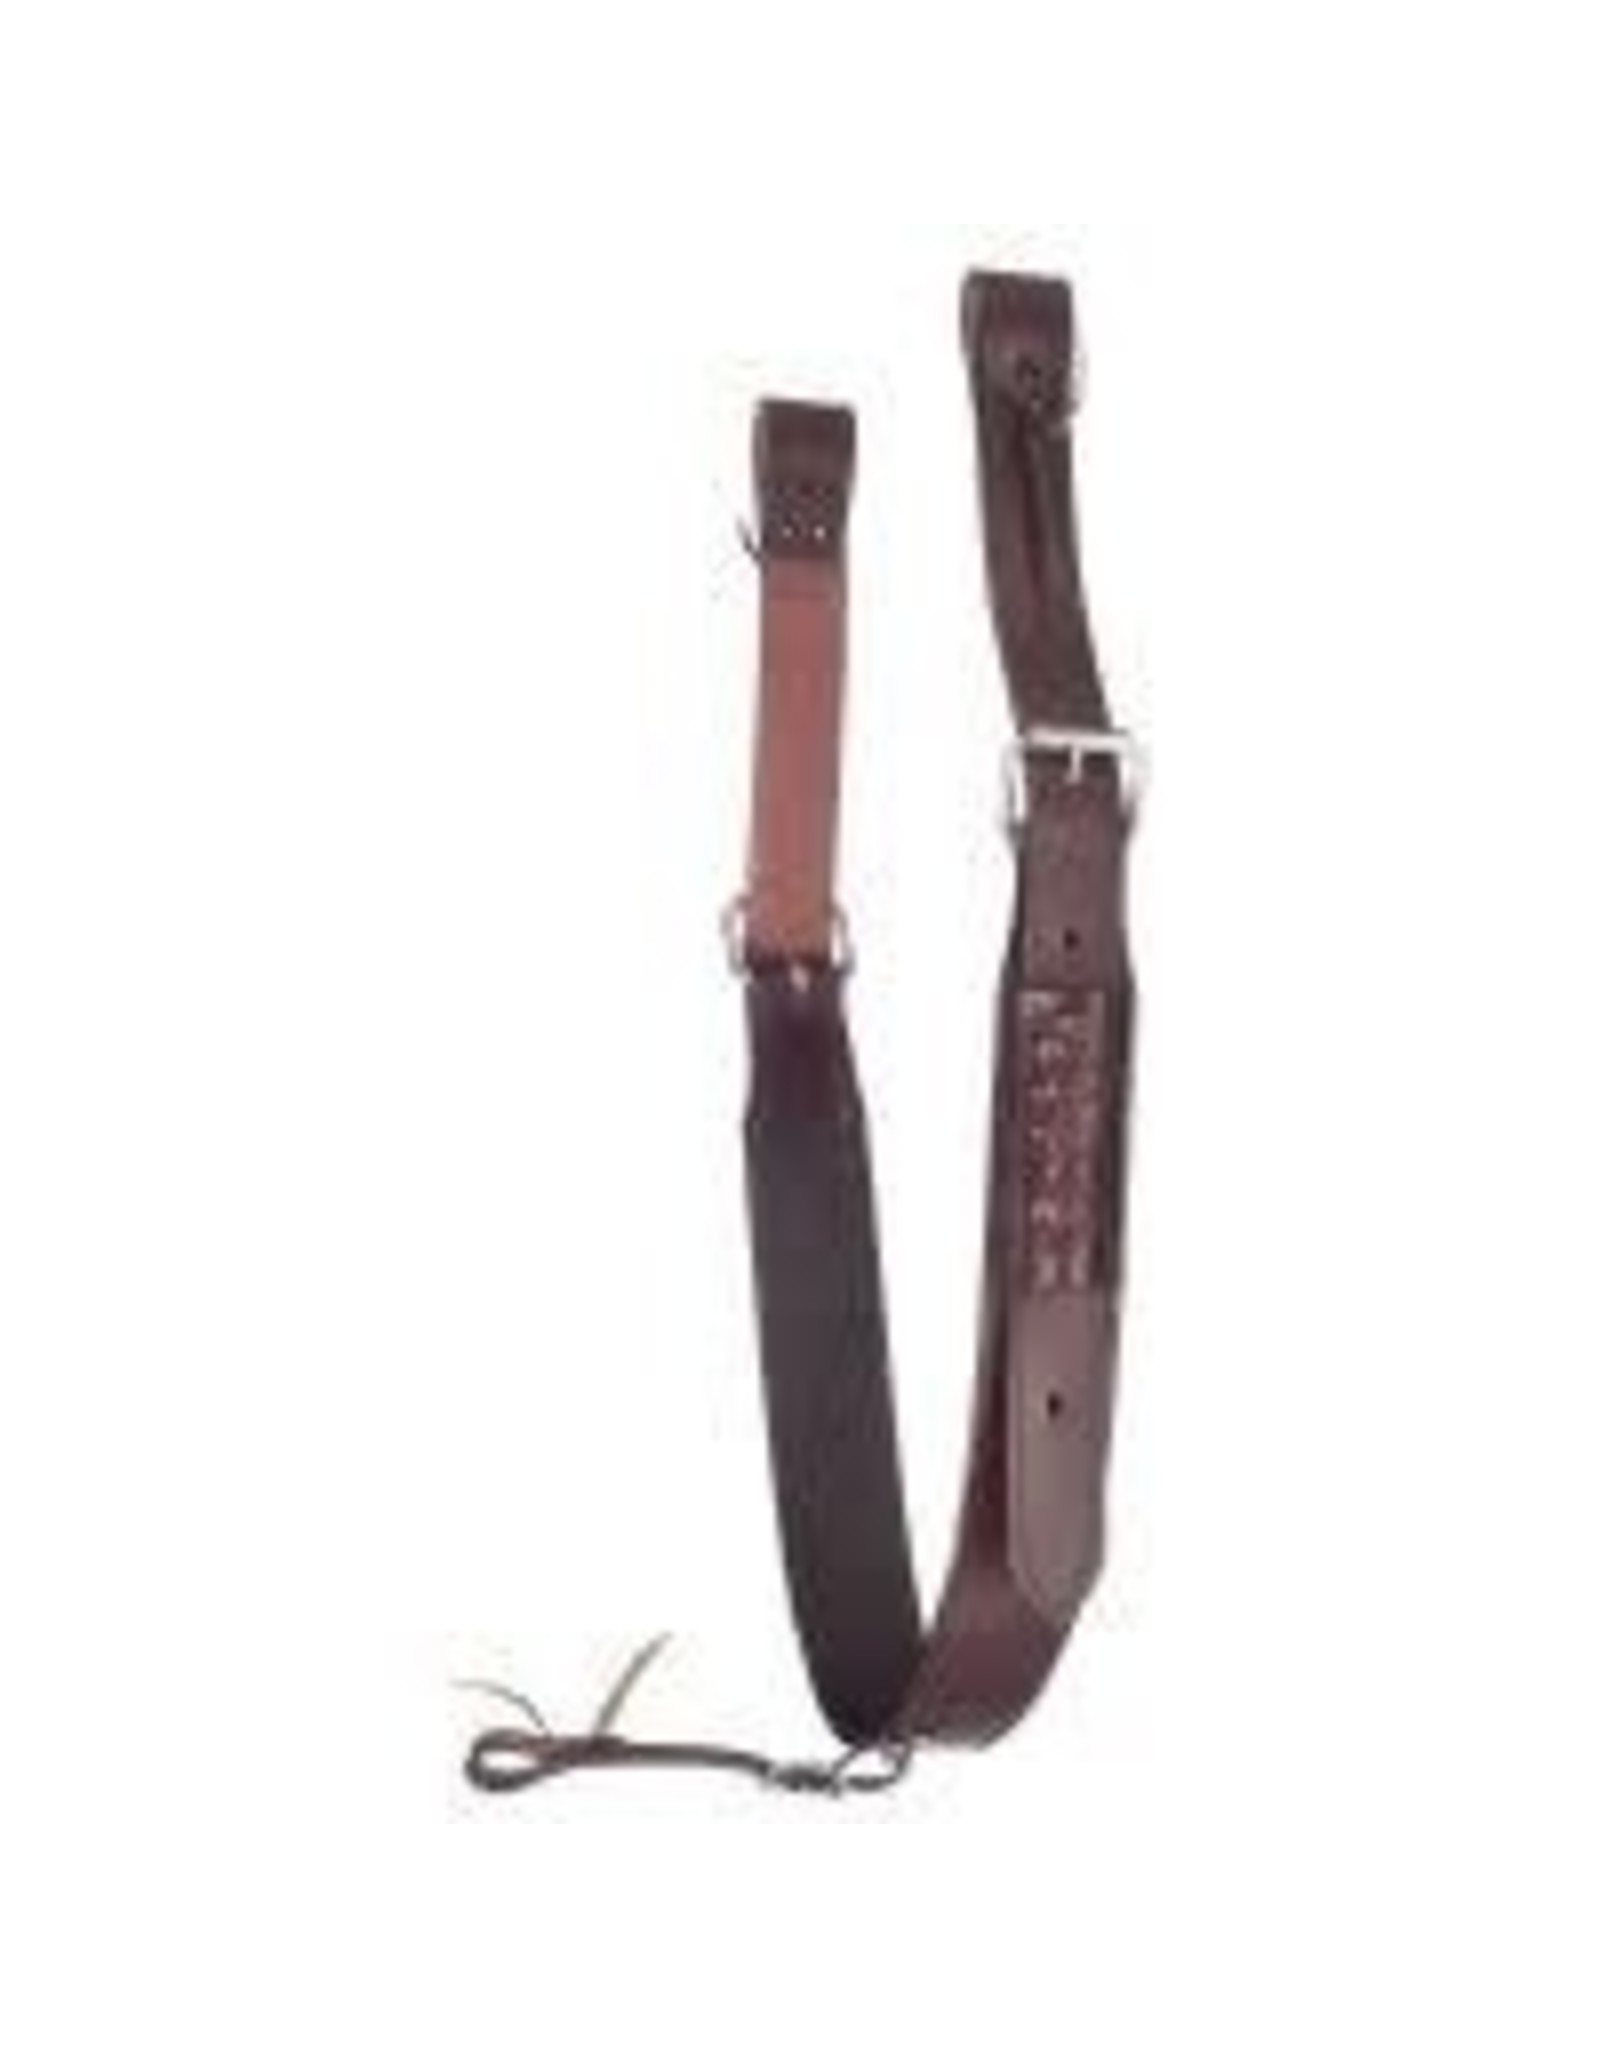 BB* Flank Cinch - Single Ply, 2 1/2" wide body center with 1 3/4" billets. Made of smooth leather with tooled accent on keepers and plated roller buckles. Complete with 5/8" connector strap.- Light Chestnut- 56-1572